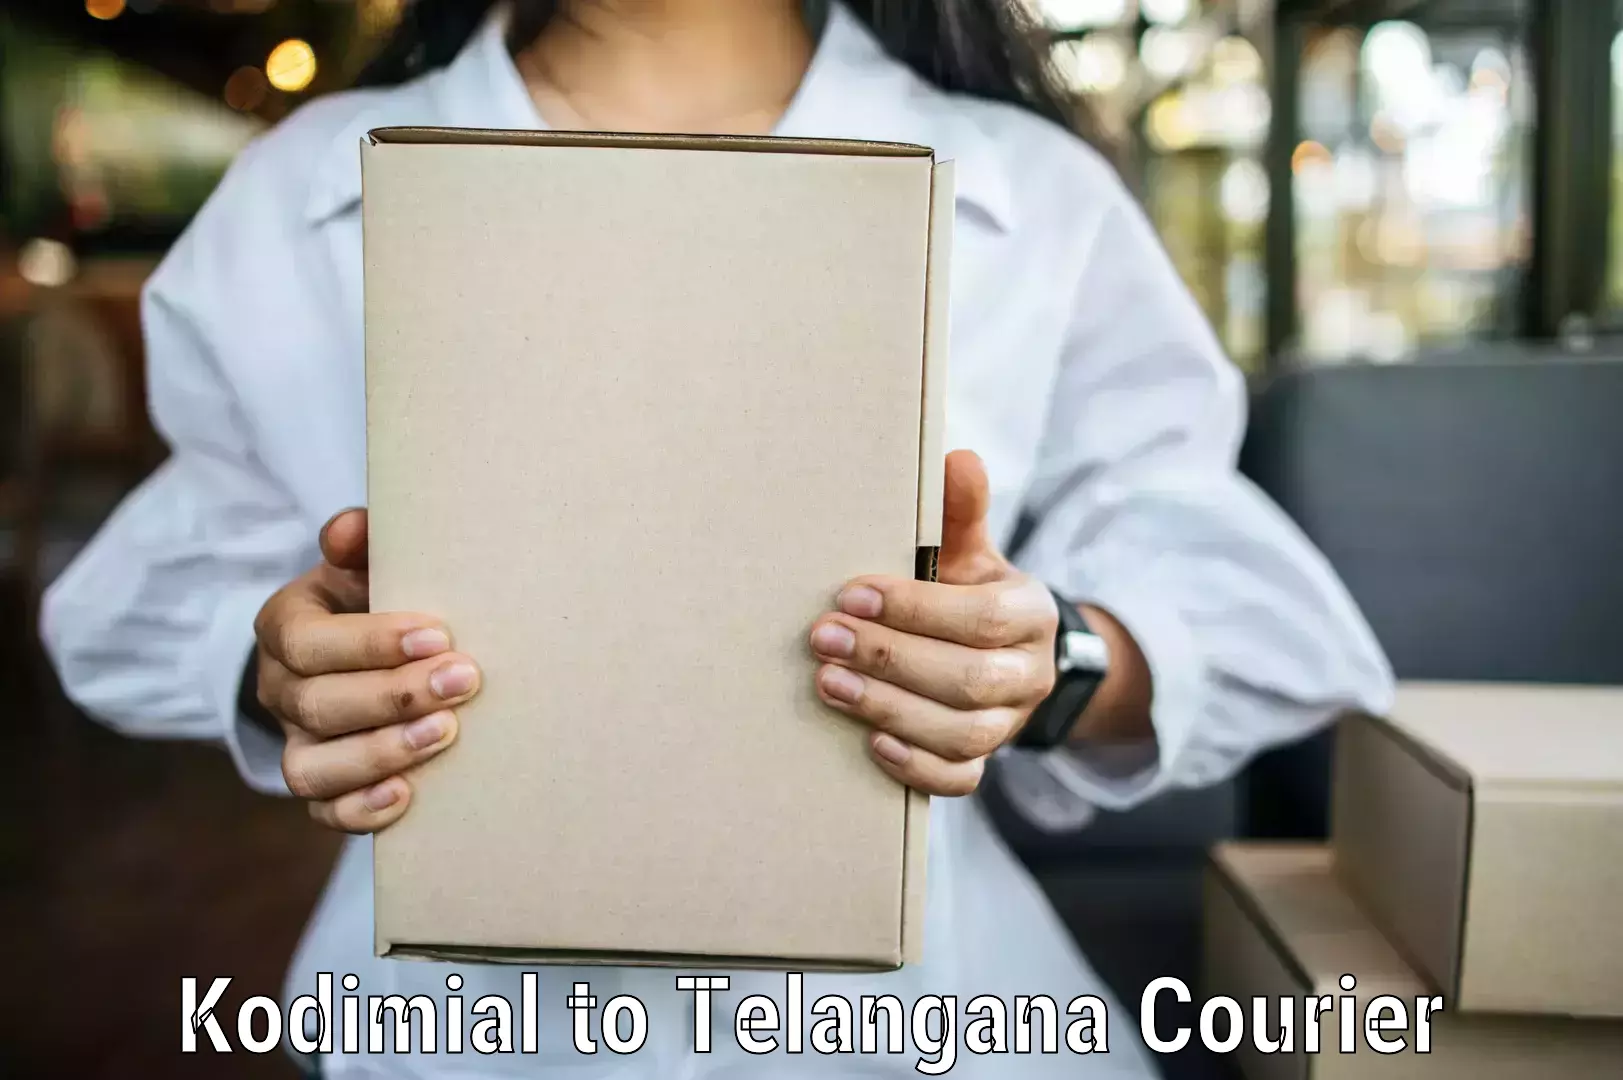 Cash on delivery service Kodimial to Telangana